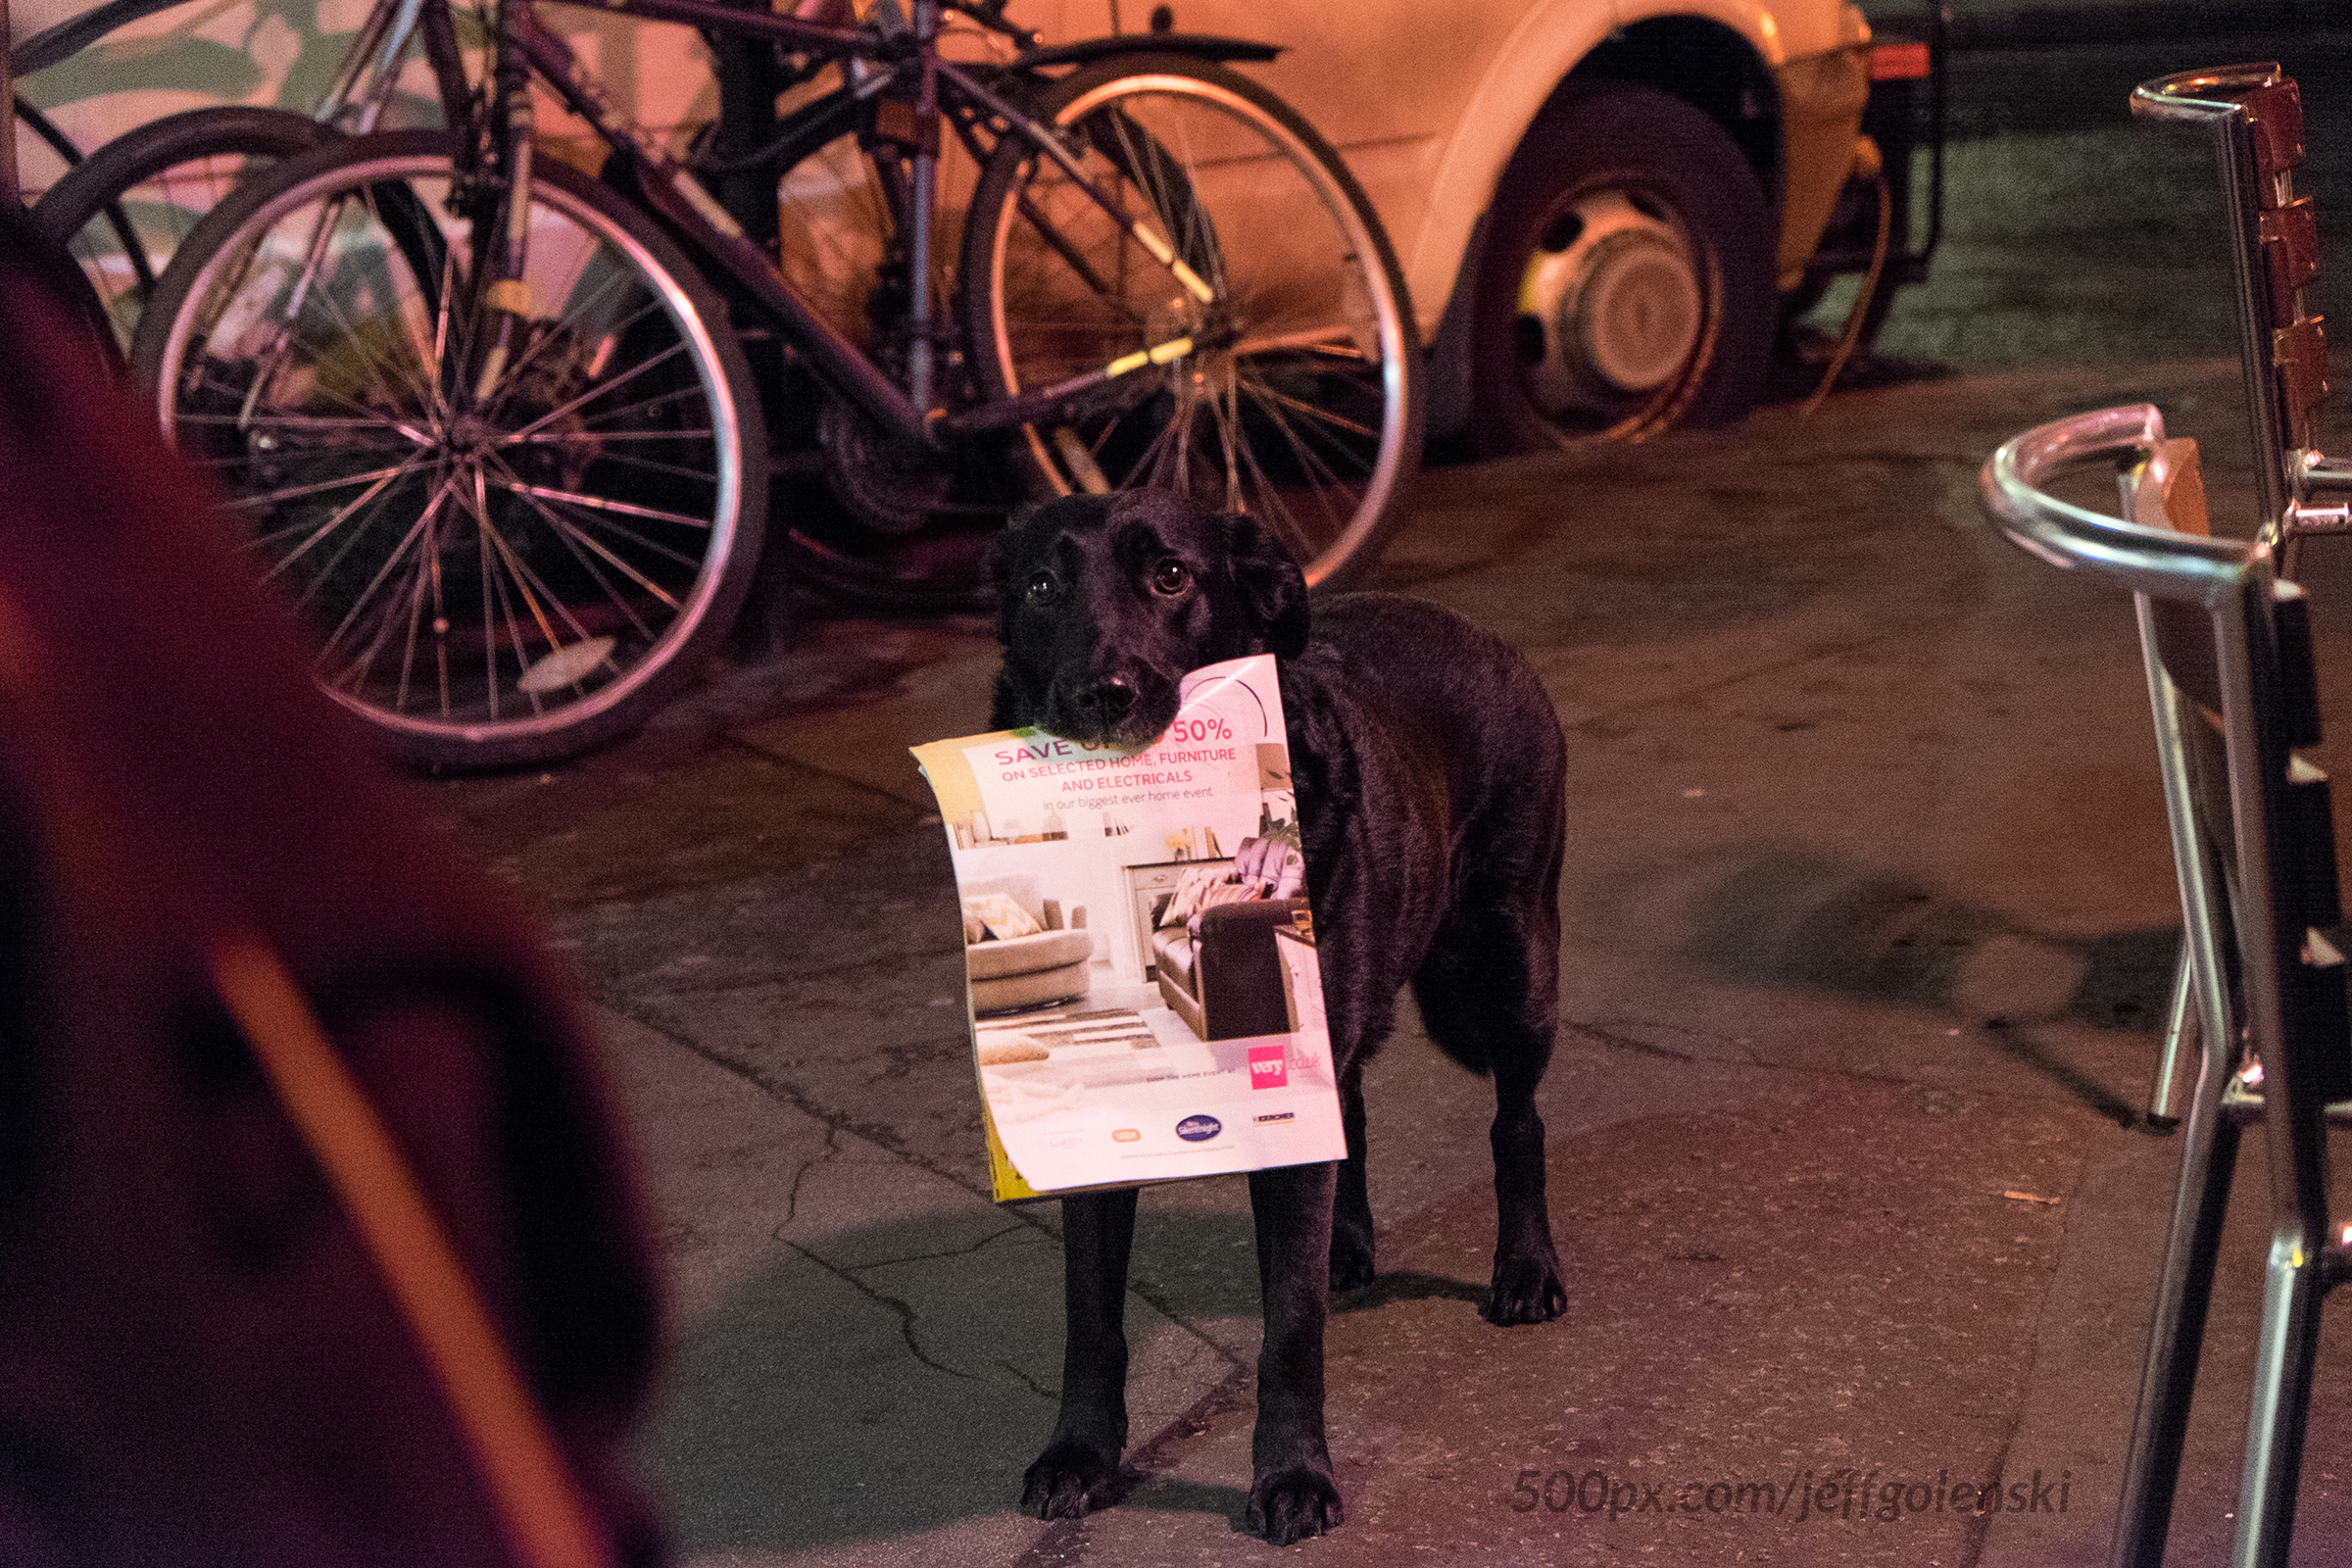 A beggars dog was trained to look especially cute in order to get donations from tourists.